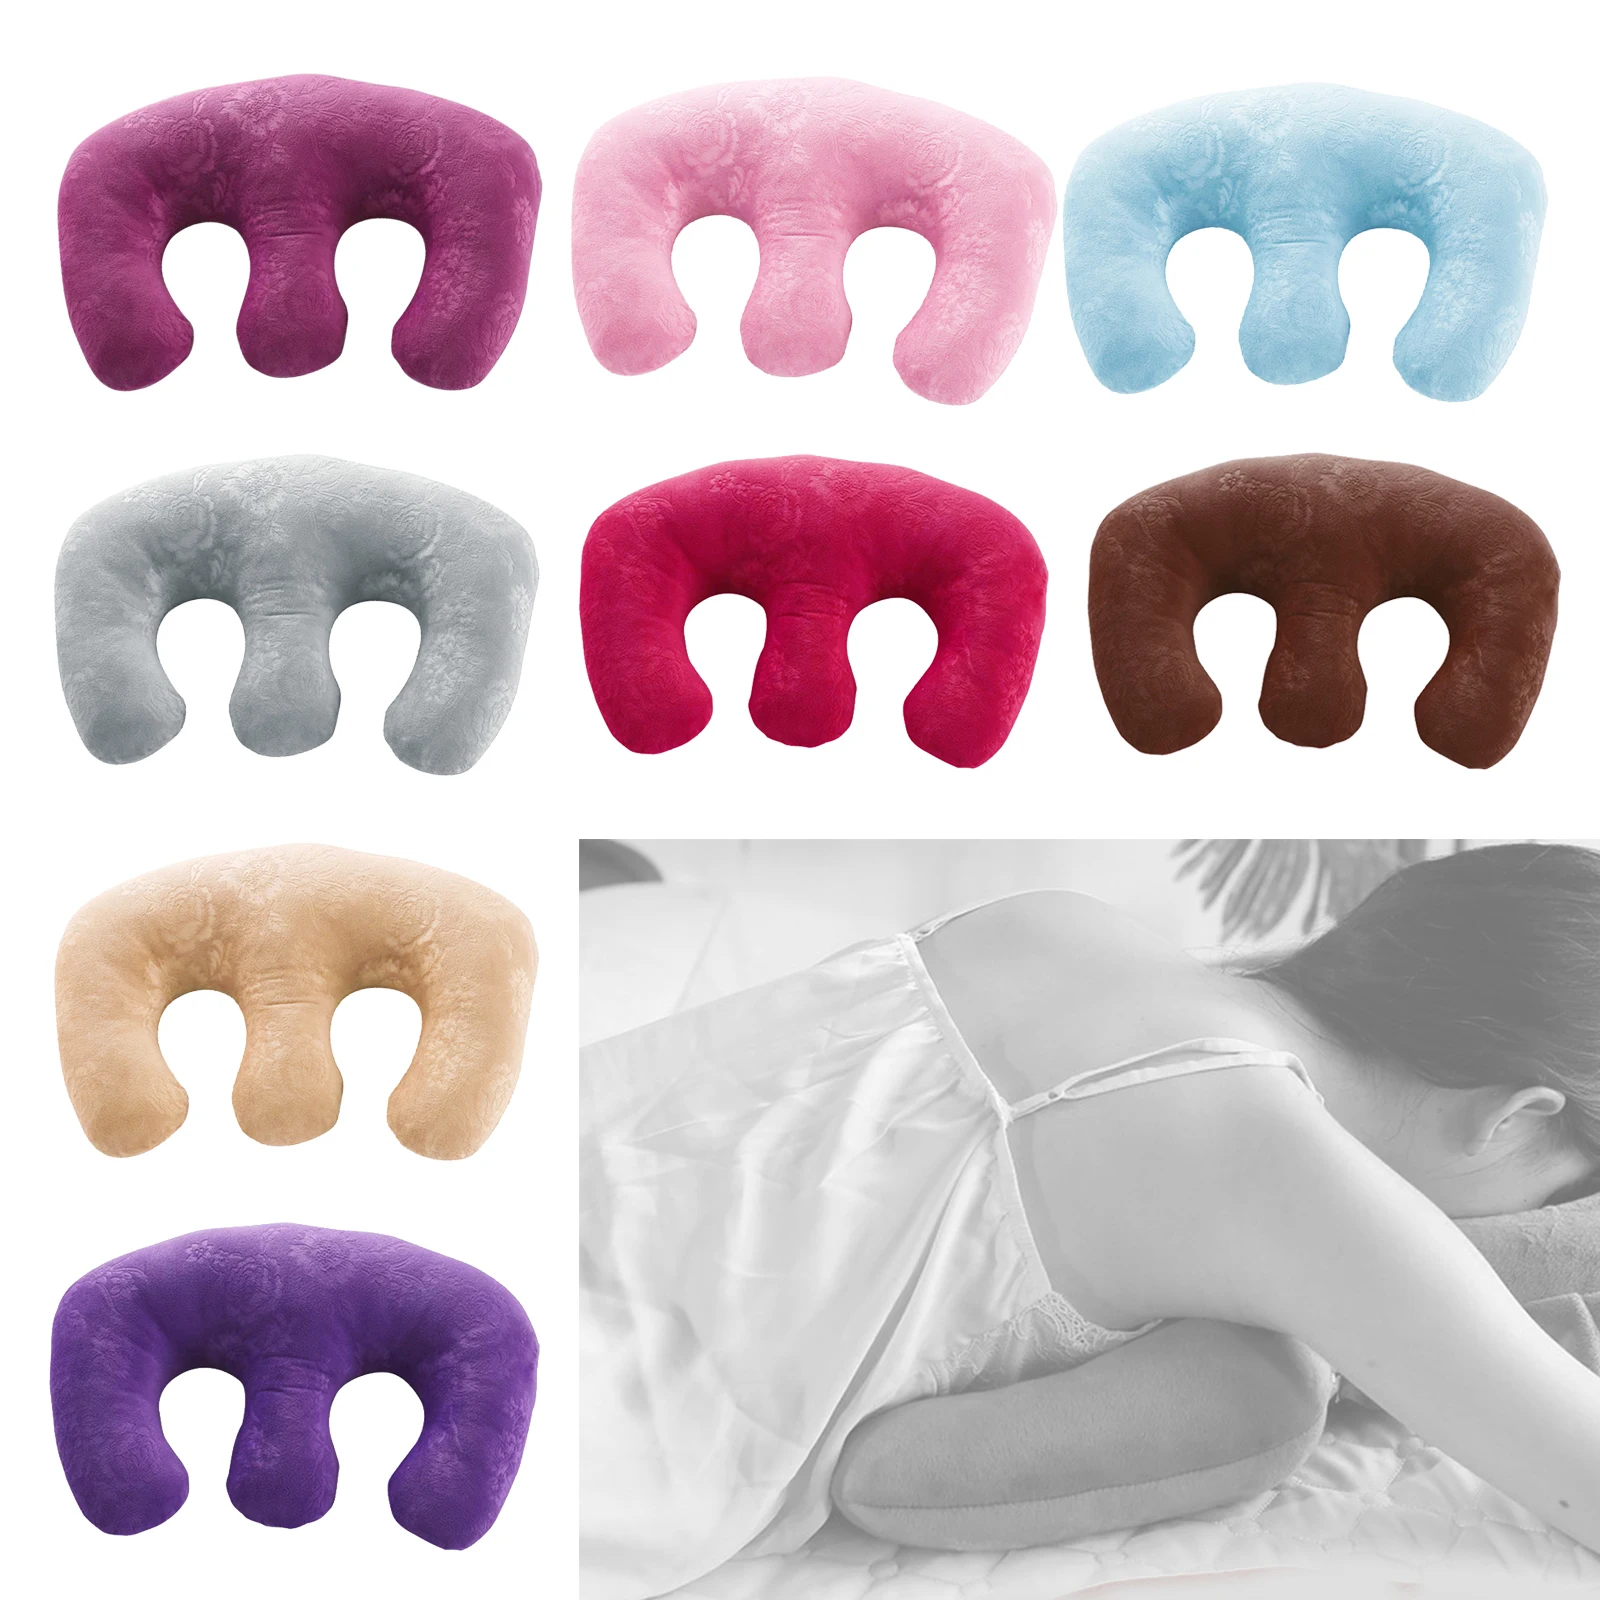 Soft Detachable Chest Pillow Pads For Spa Beauty Salon Body Relaxing Home Use Breast Support